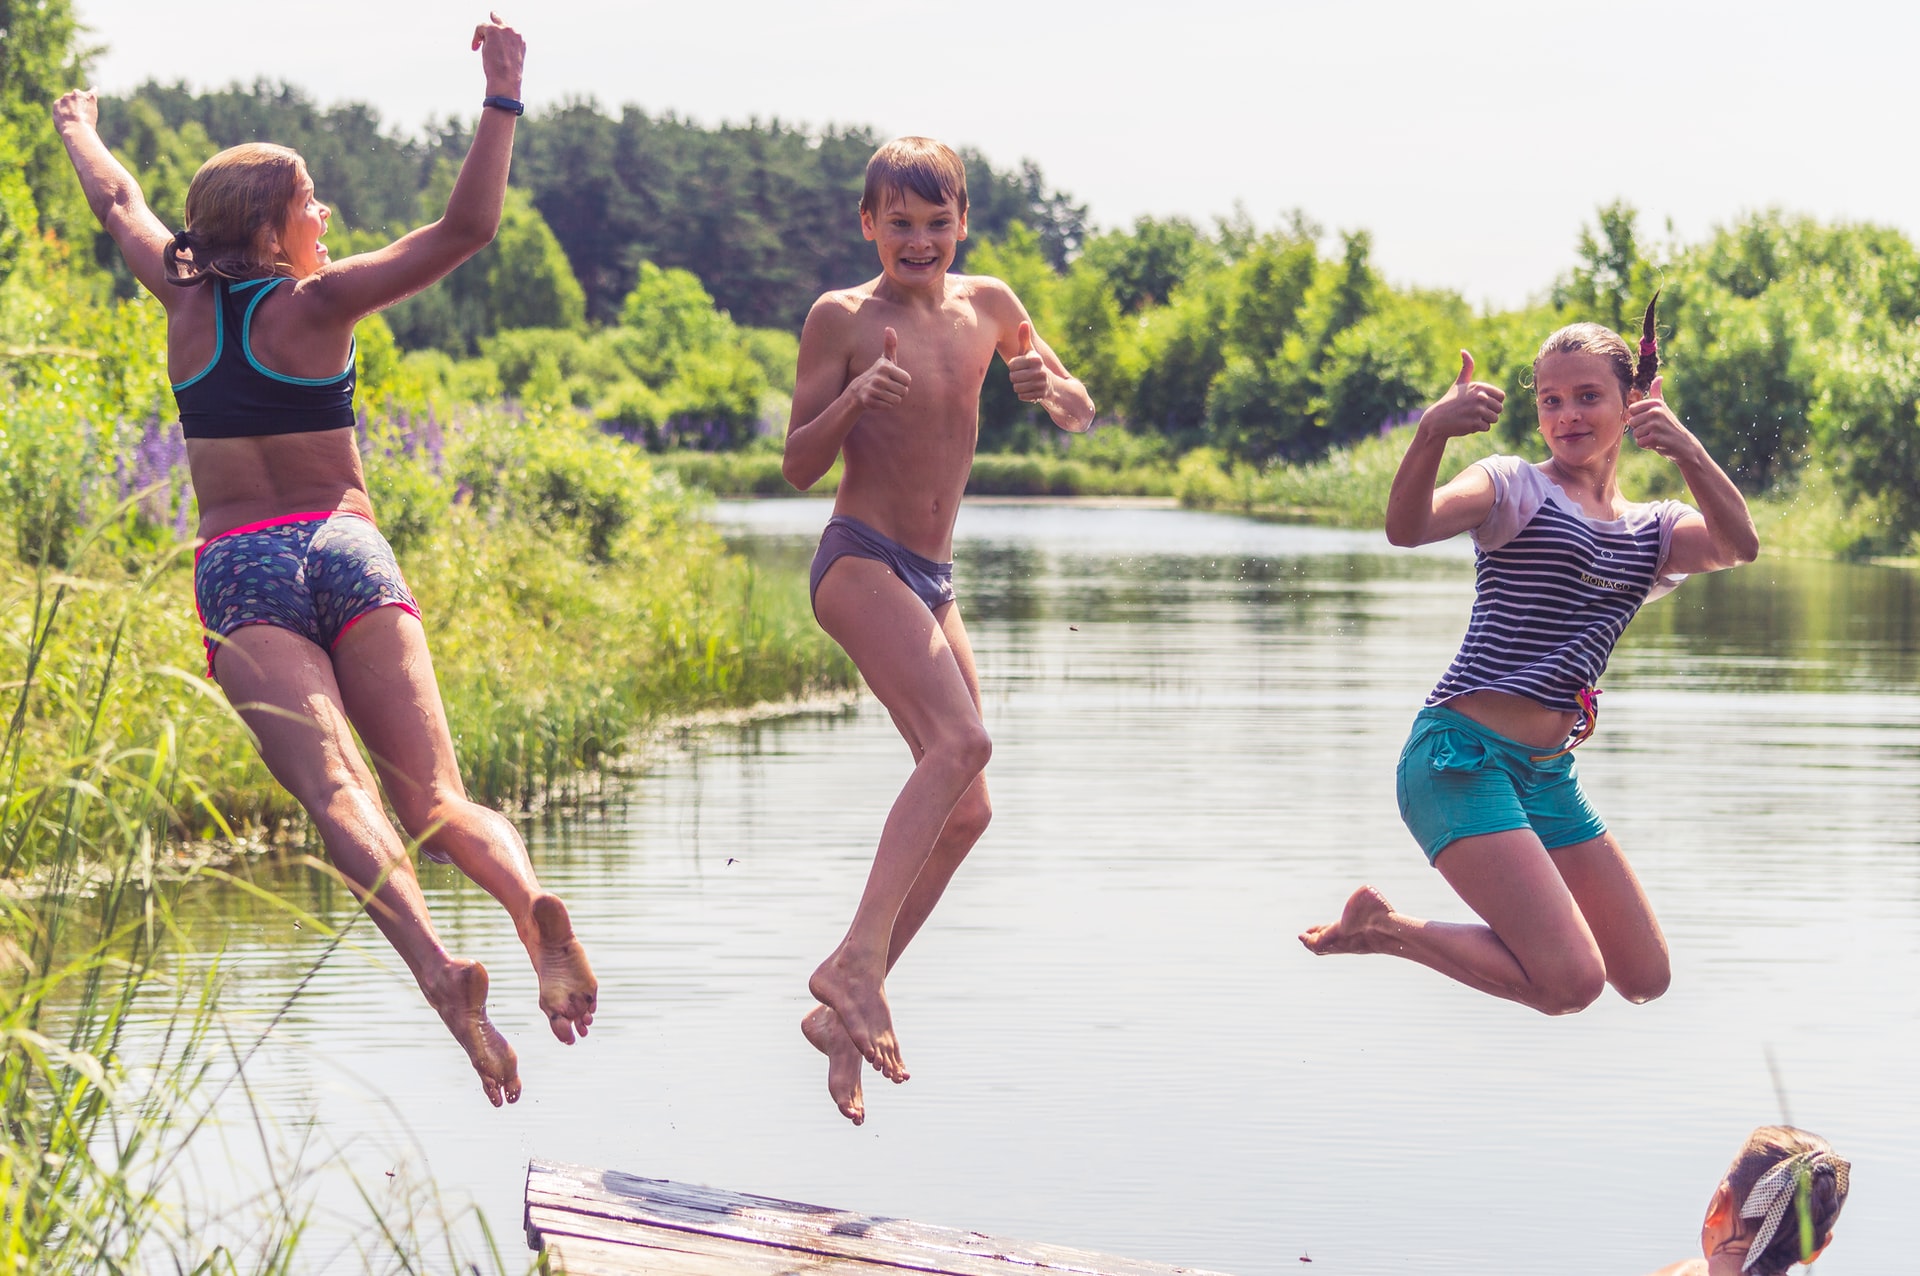 Three children in swimming costumes jumping into a lake, in the summer